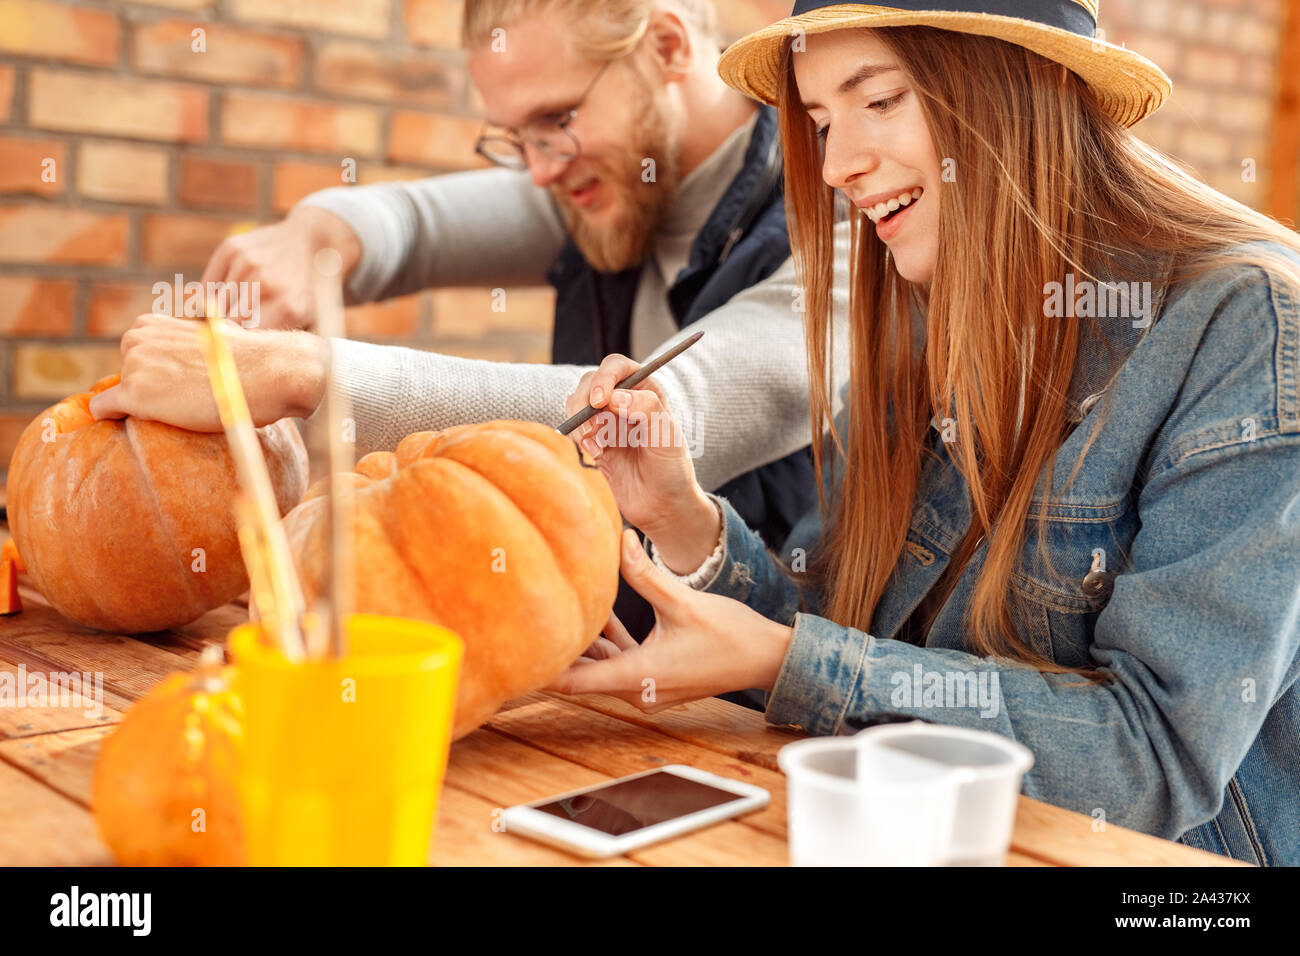 Young adult woman and man decorating ripe pumpkin for halloween Stock Photo